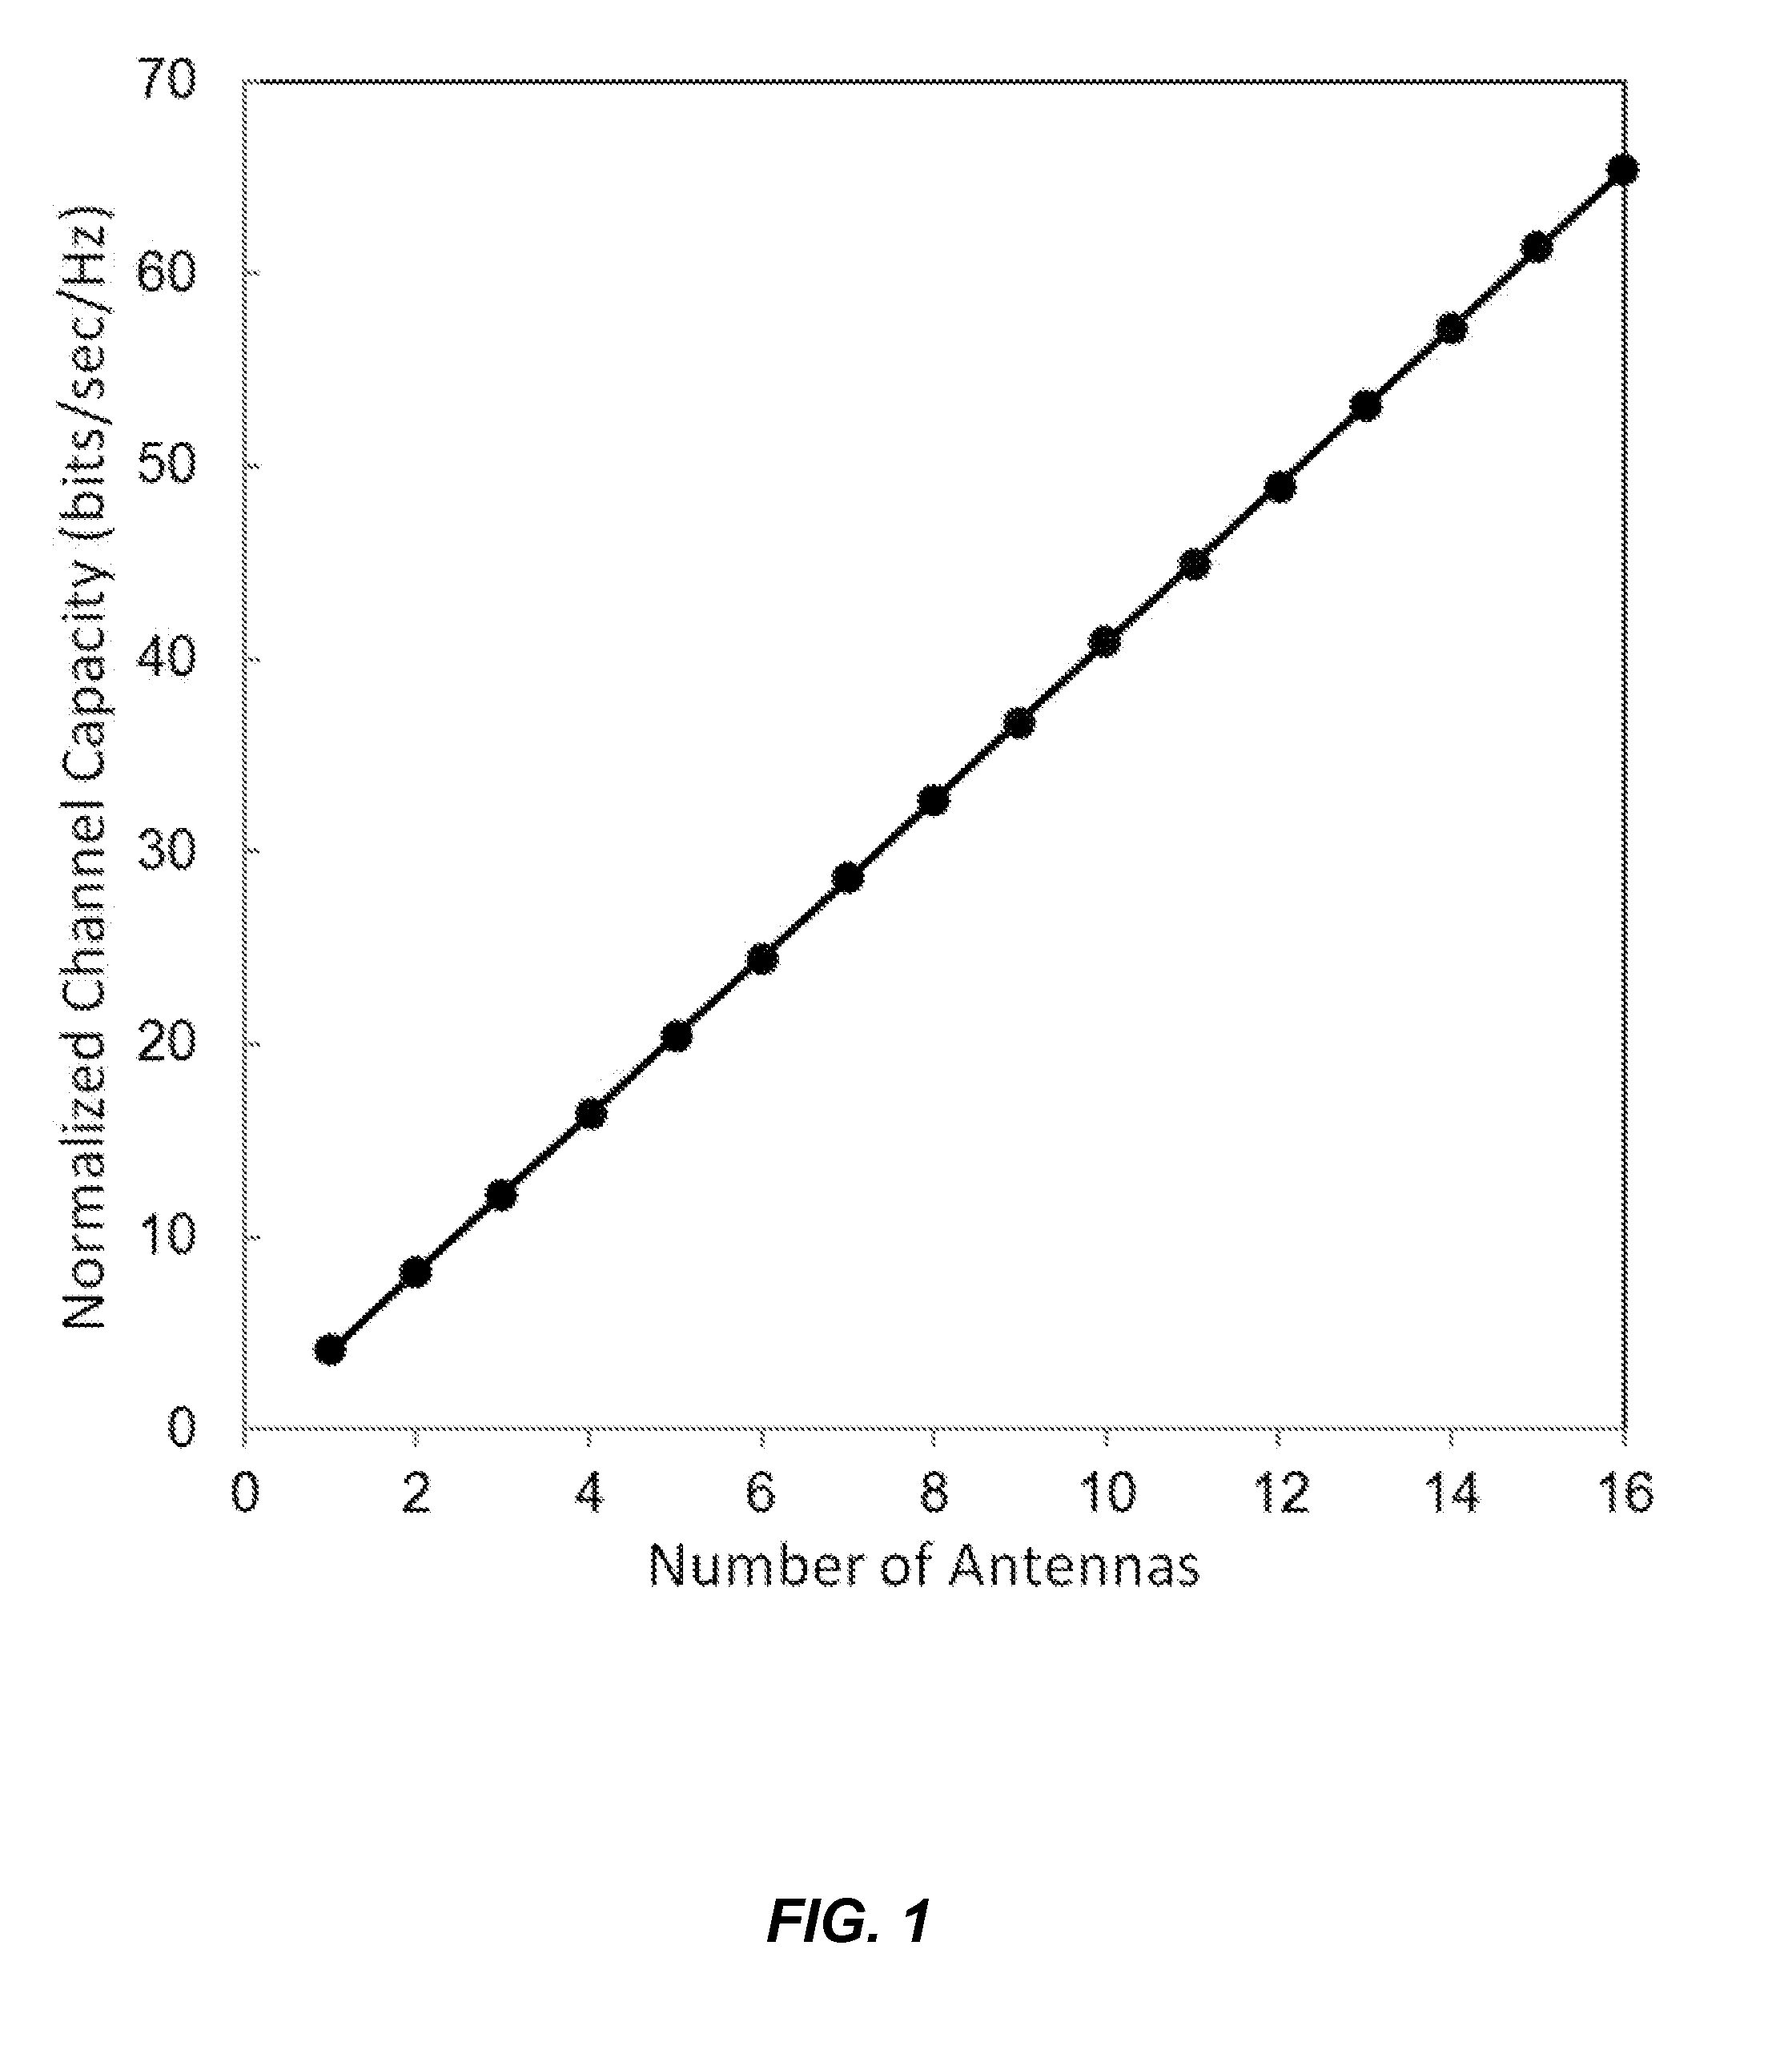 Transparent antennas on a display device